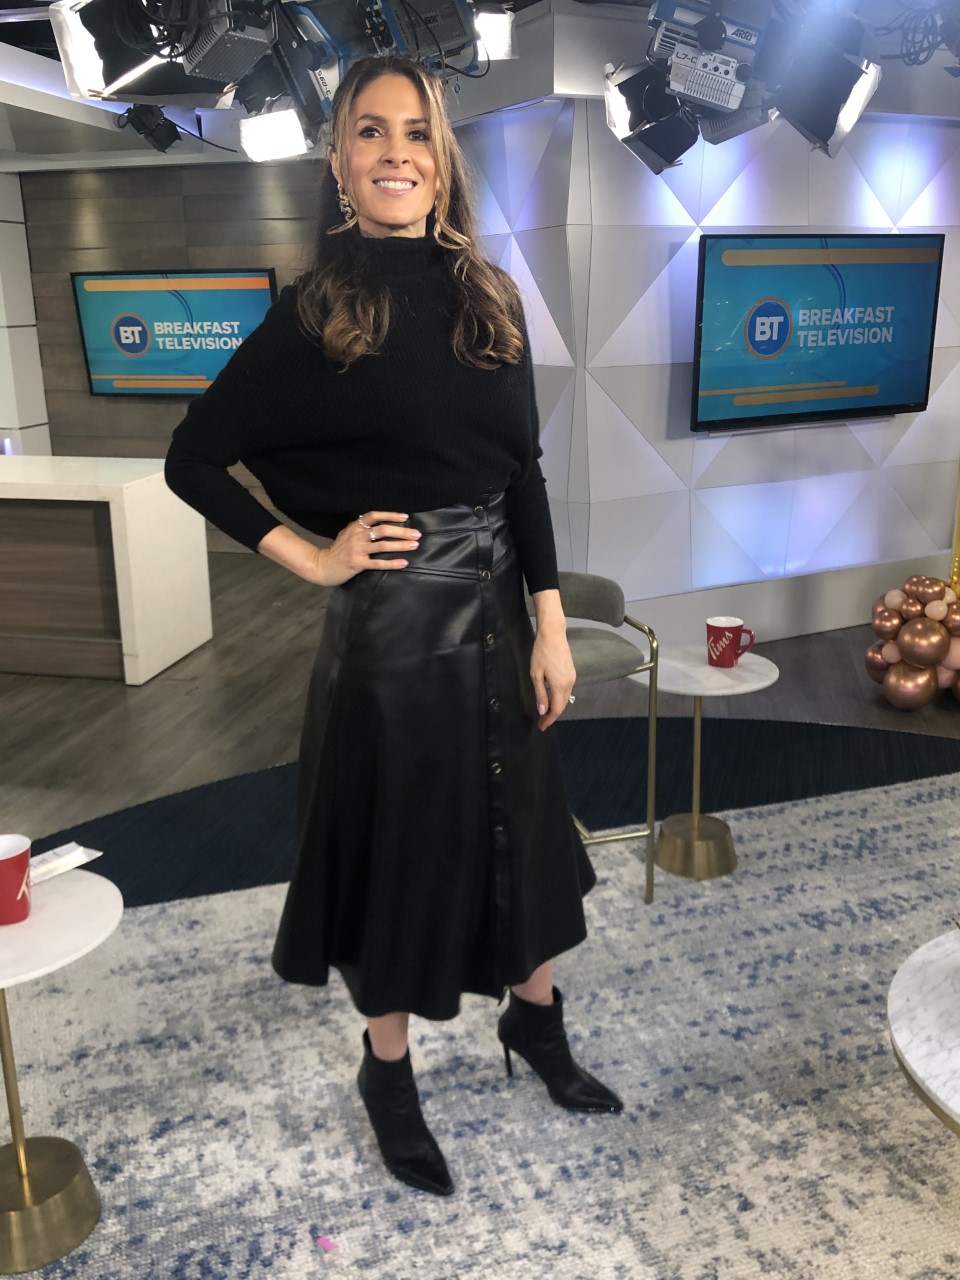 Dina wearing black leather skirt with black long sleeve